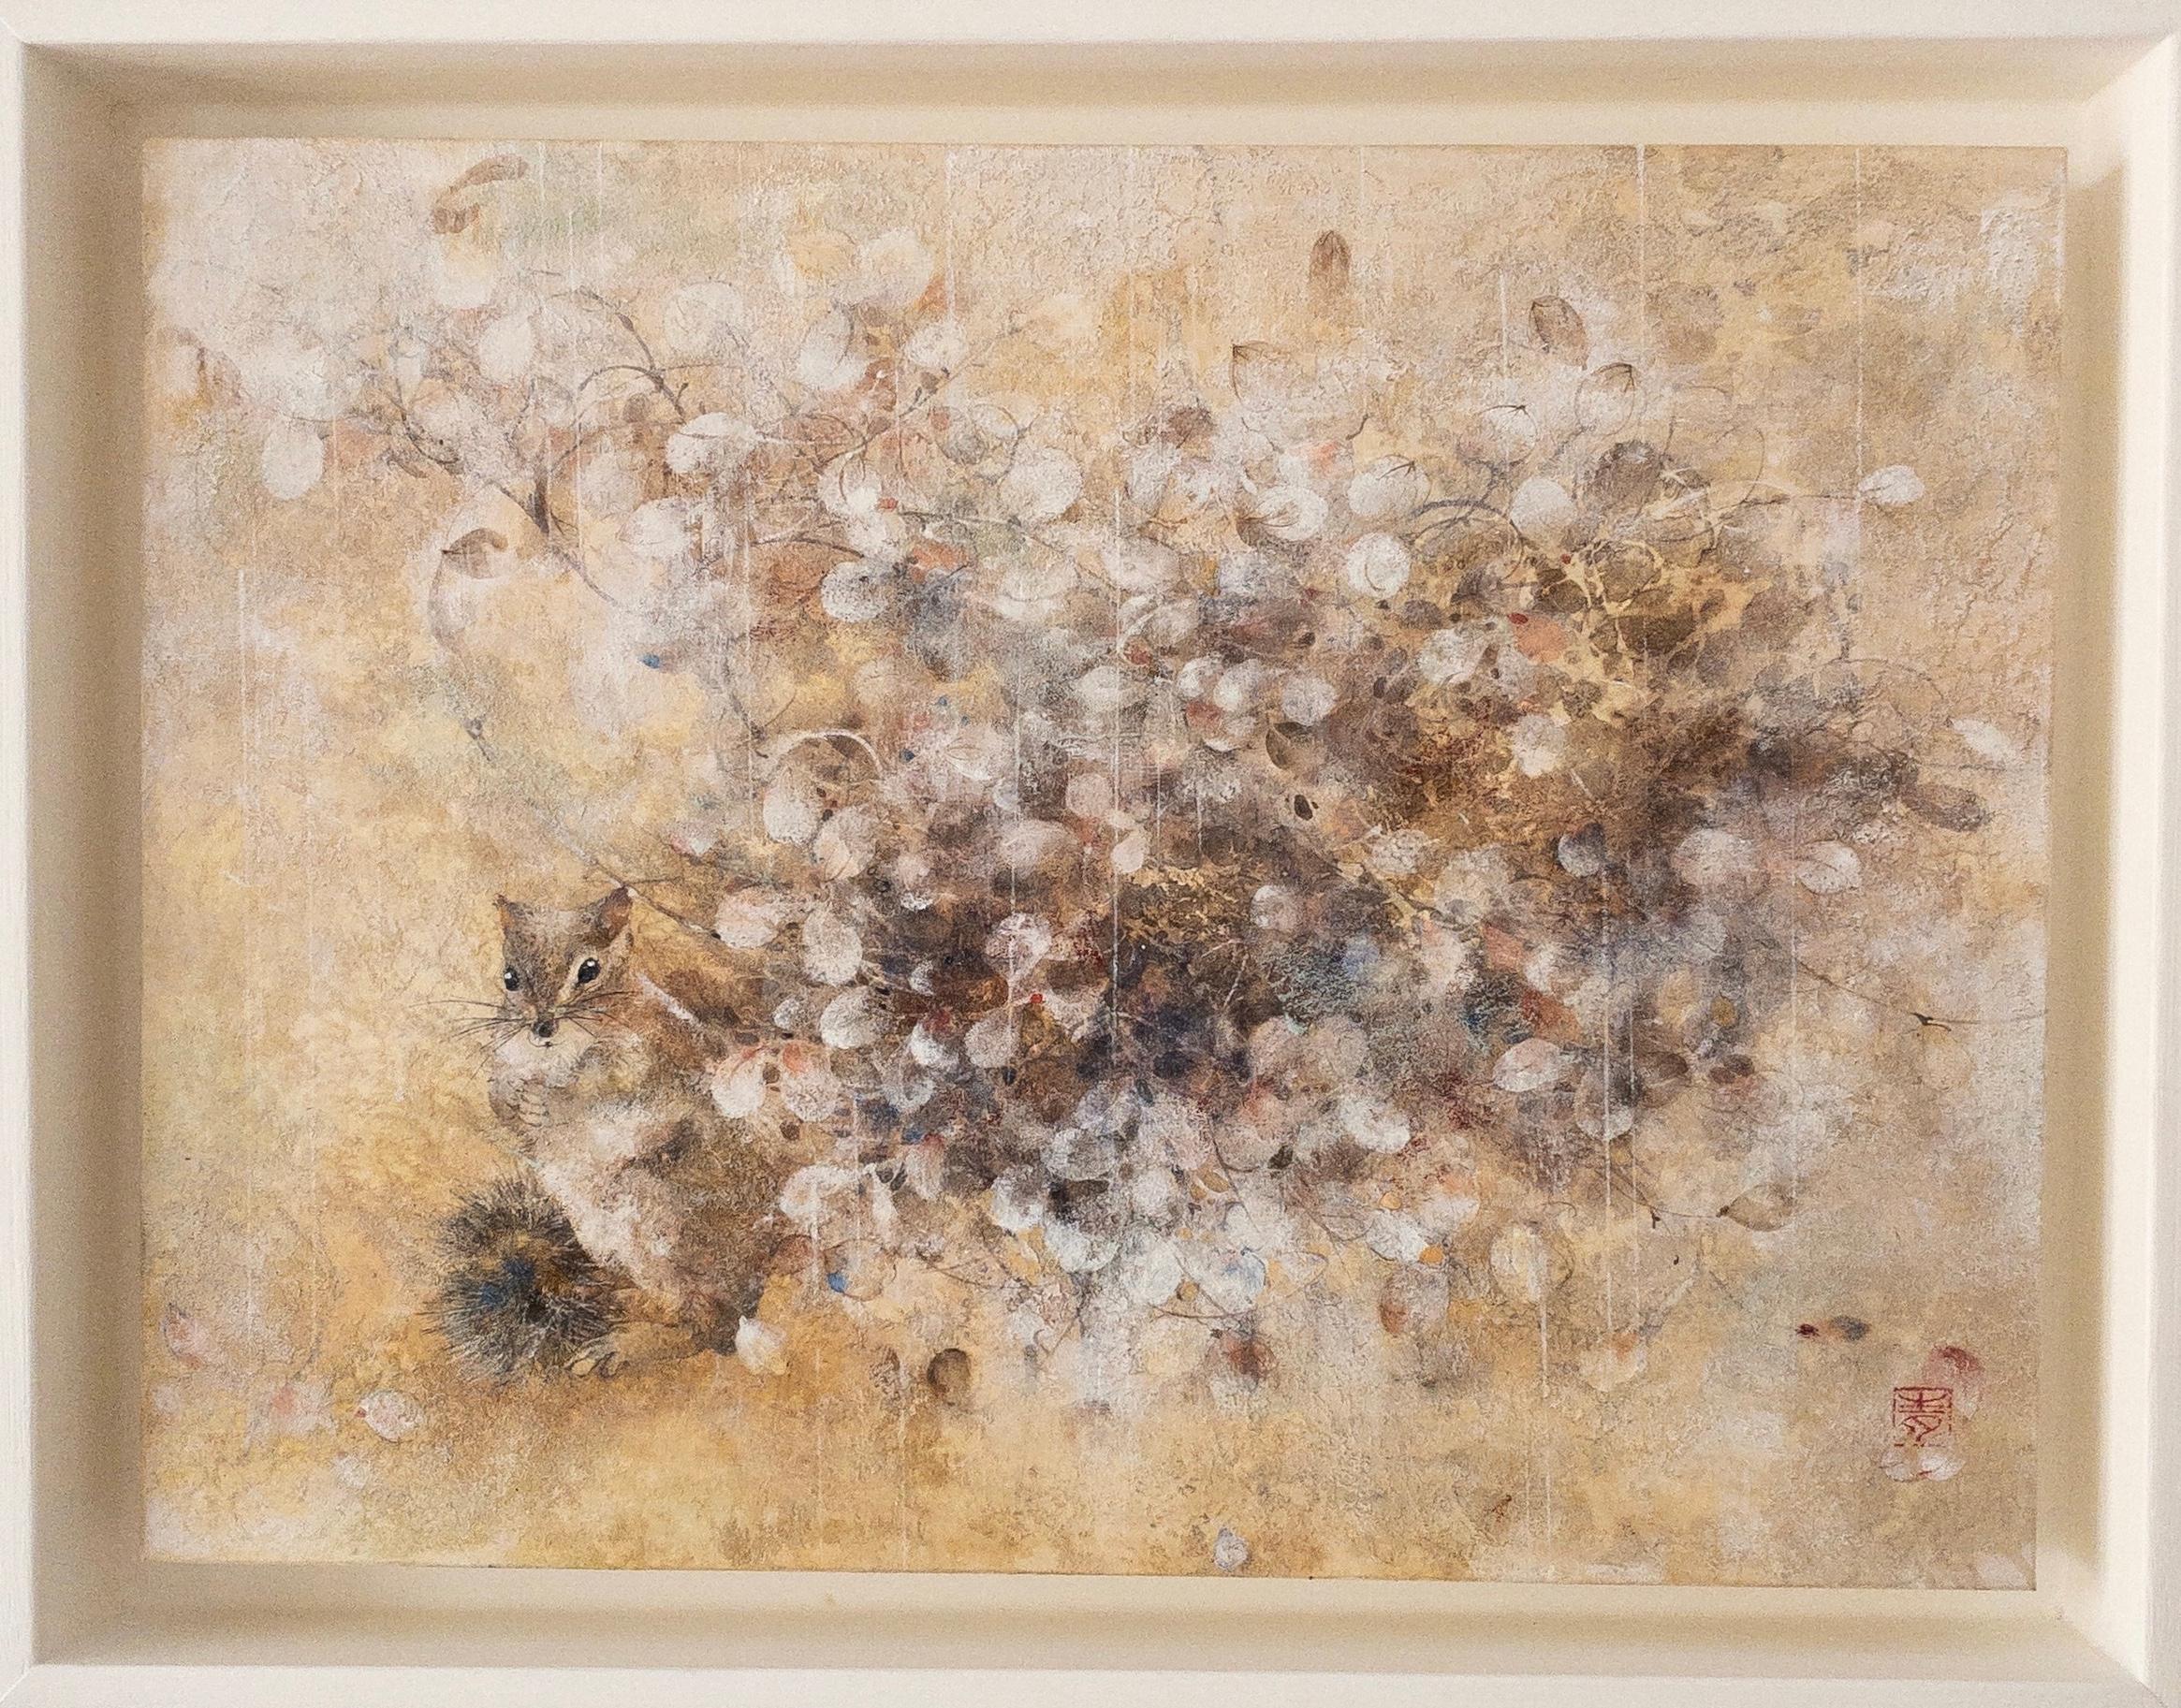 Hide and seek by Chen Yiching -Contemporary nihonga painting, flora, soft colors - Mixed Media Art by Yiching Chen